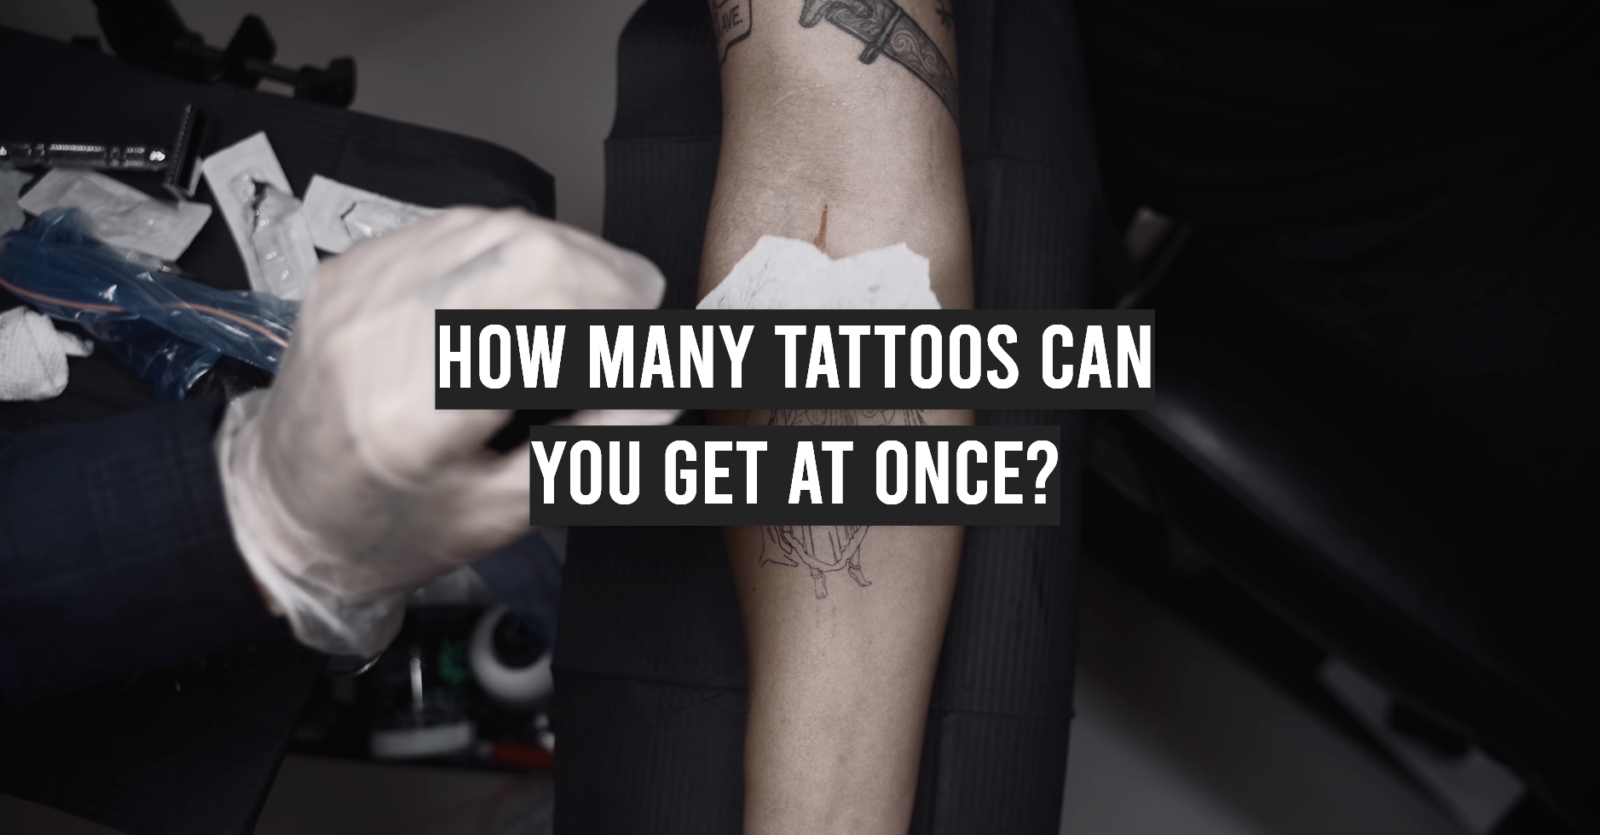 How Many Tattoos Can You Get At Once?